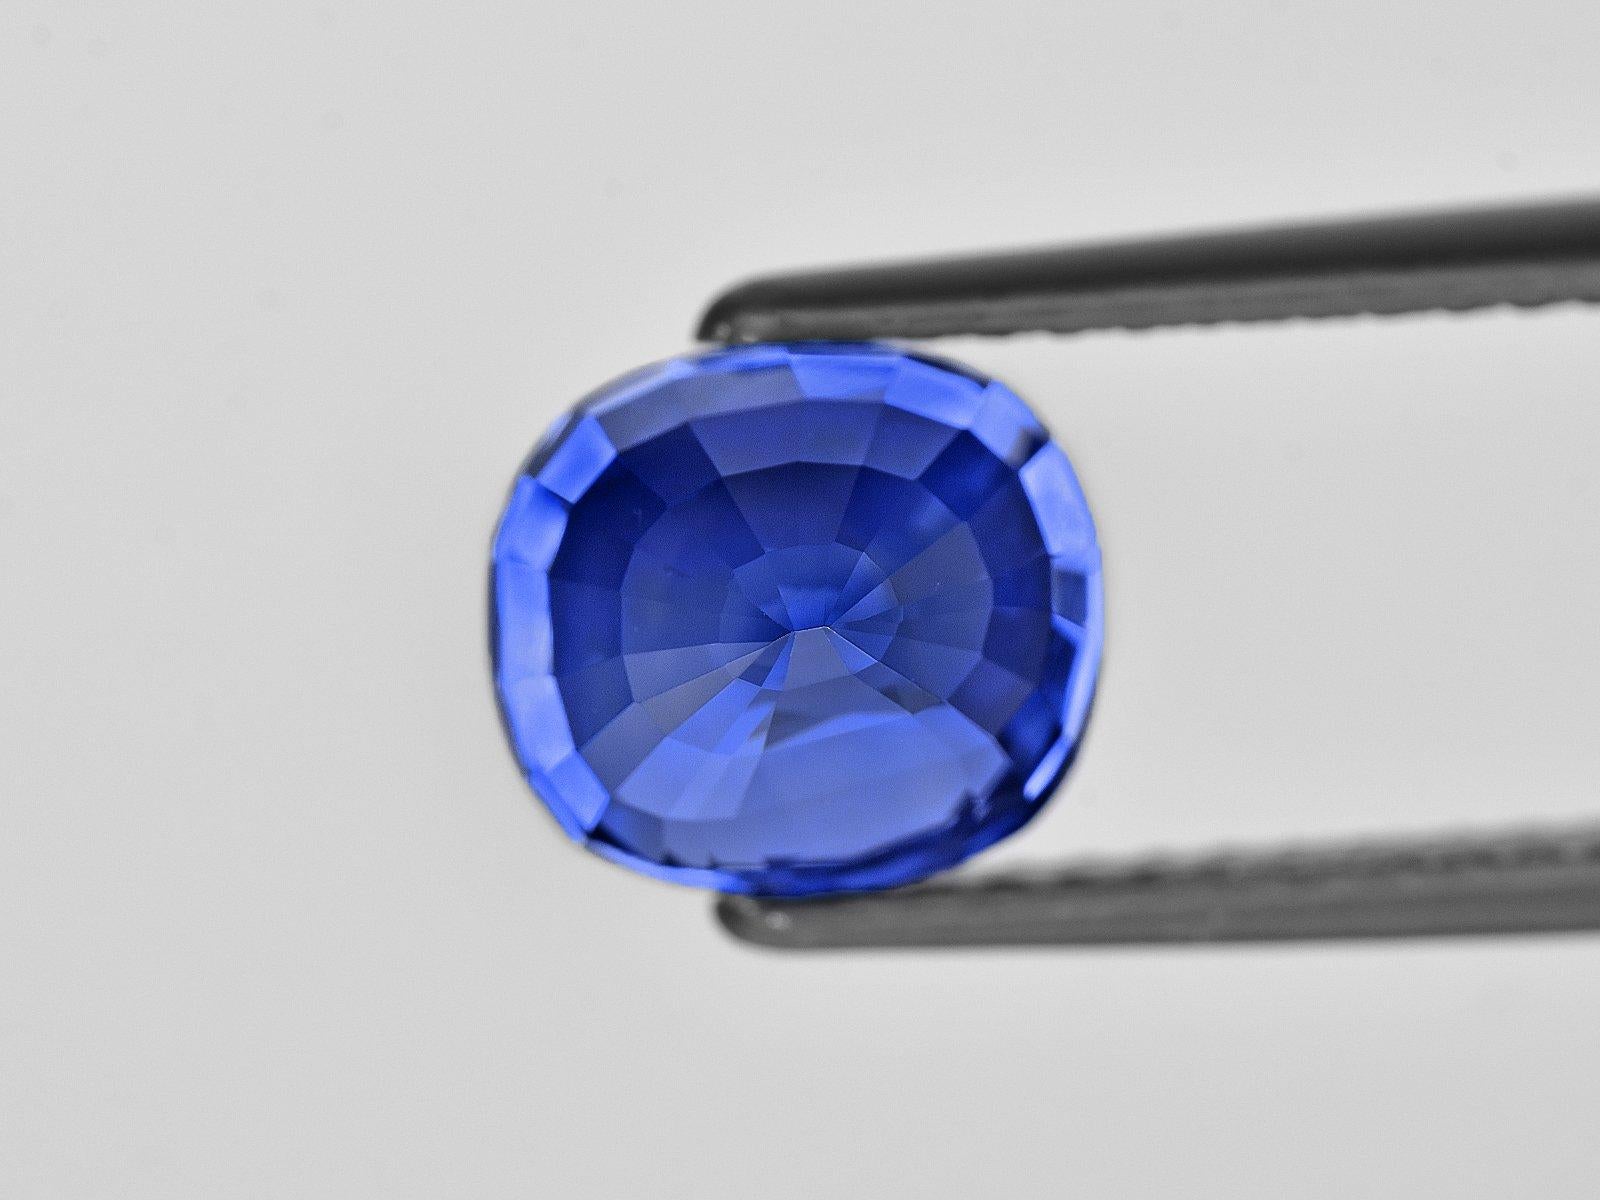 Cushion Cut Exceptional GIA Certified 5.90 Carat Kashmir Blue Sapphire Diamond Ring For Sale